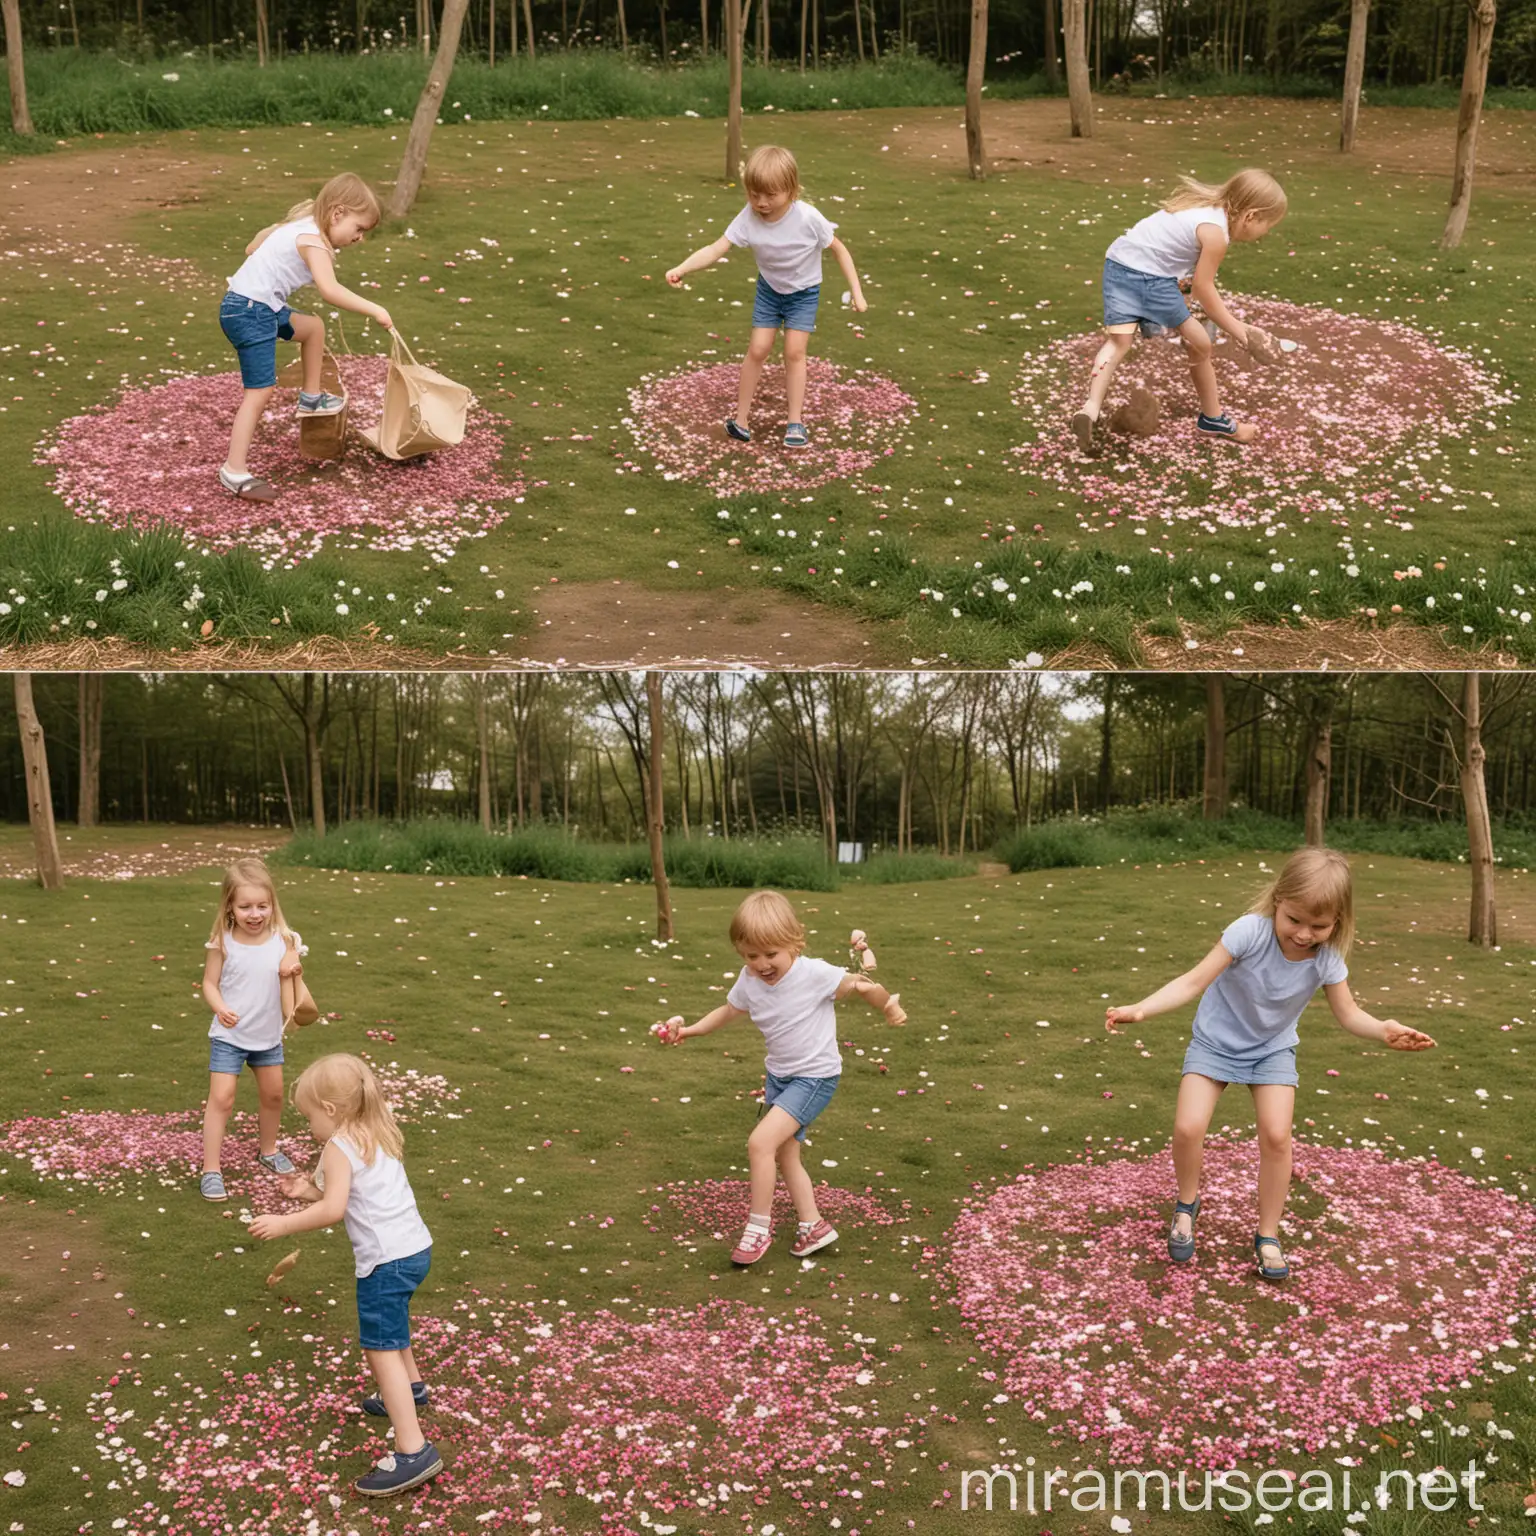 Children Playing in a Natural Playground with Falling Petals